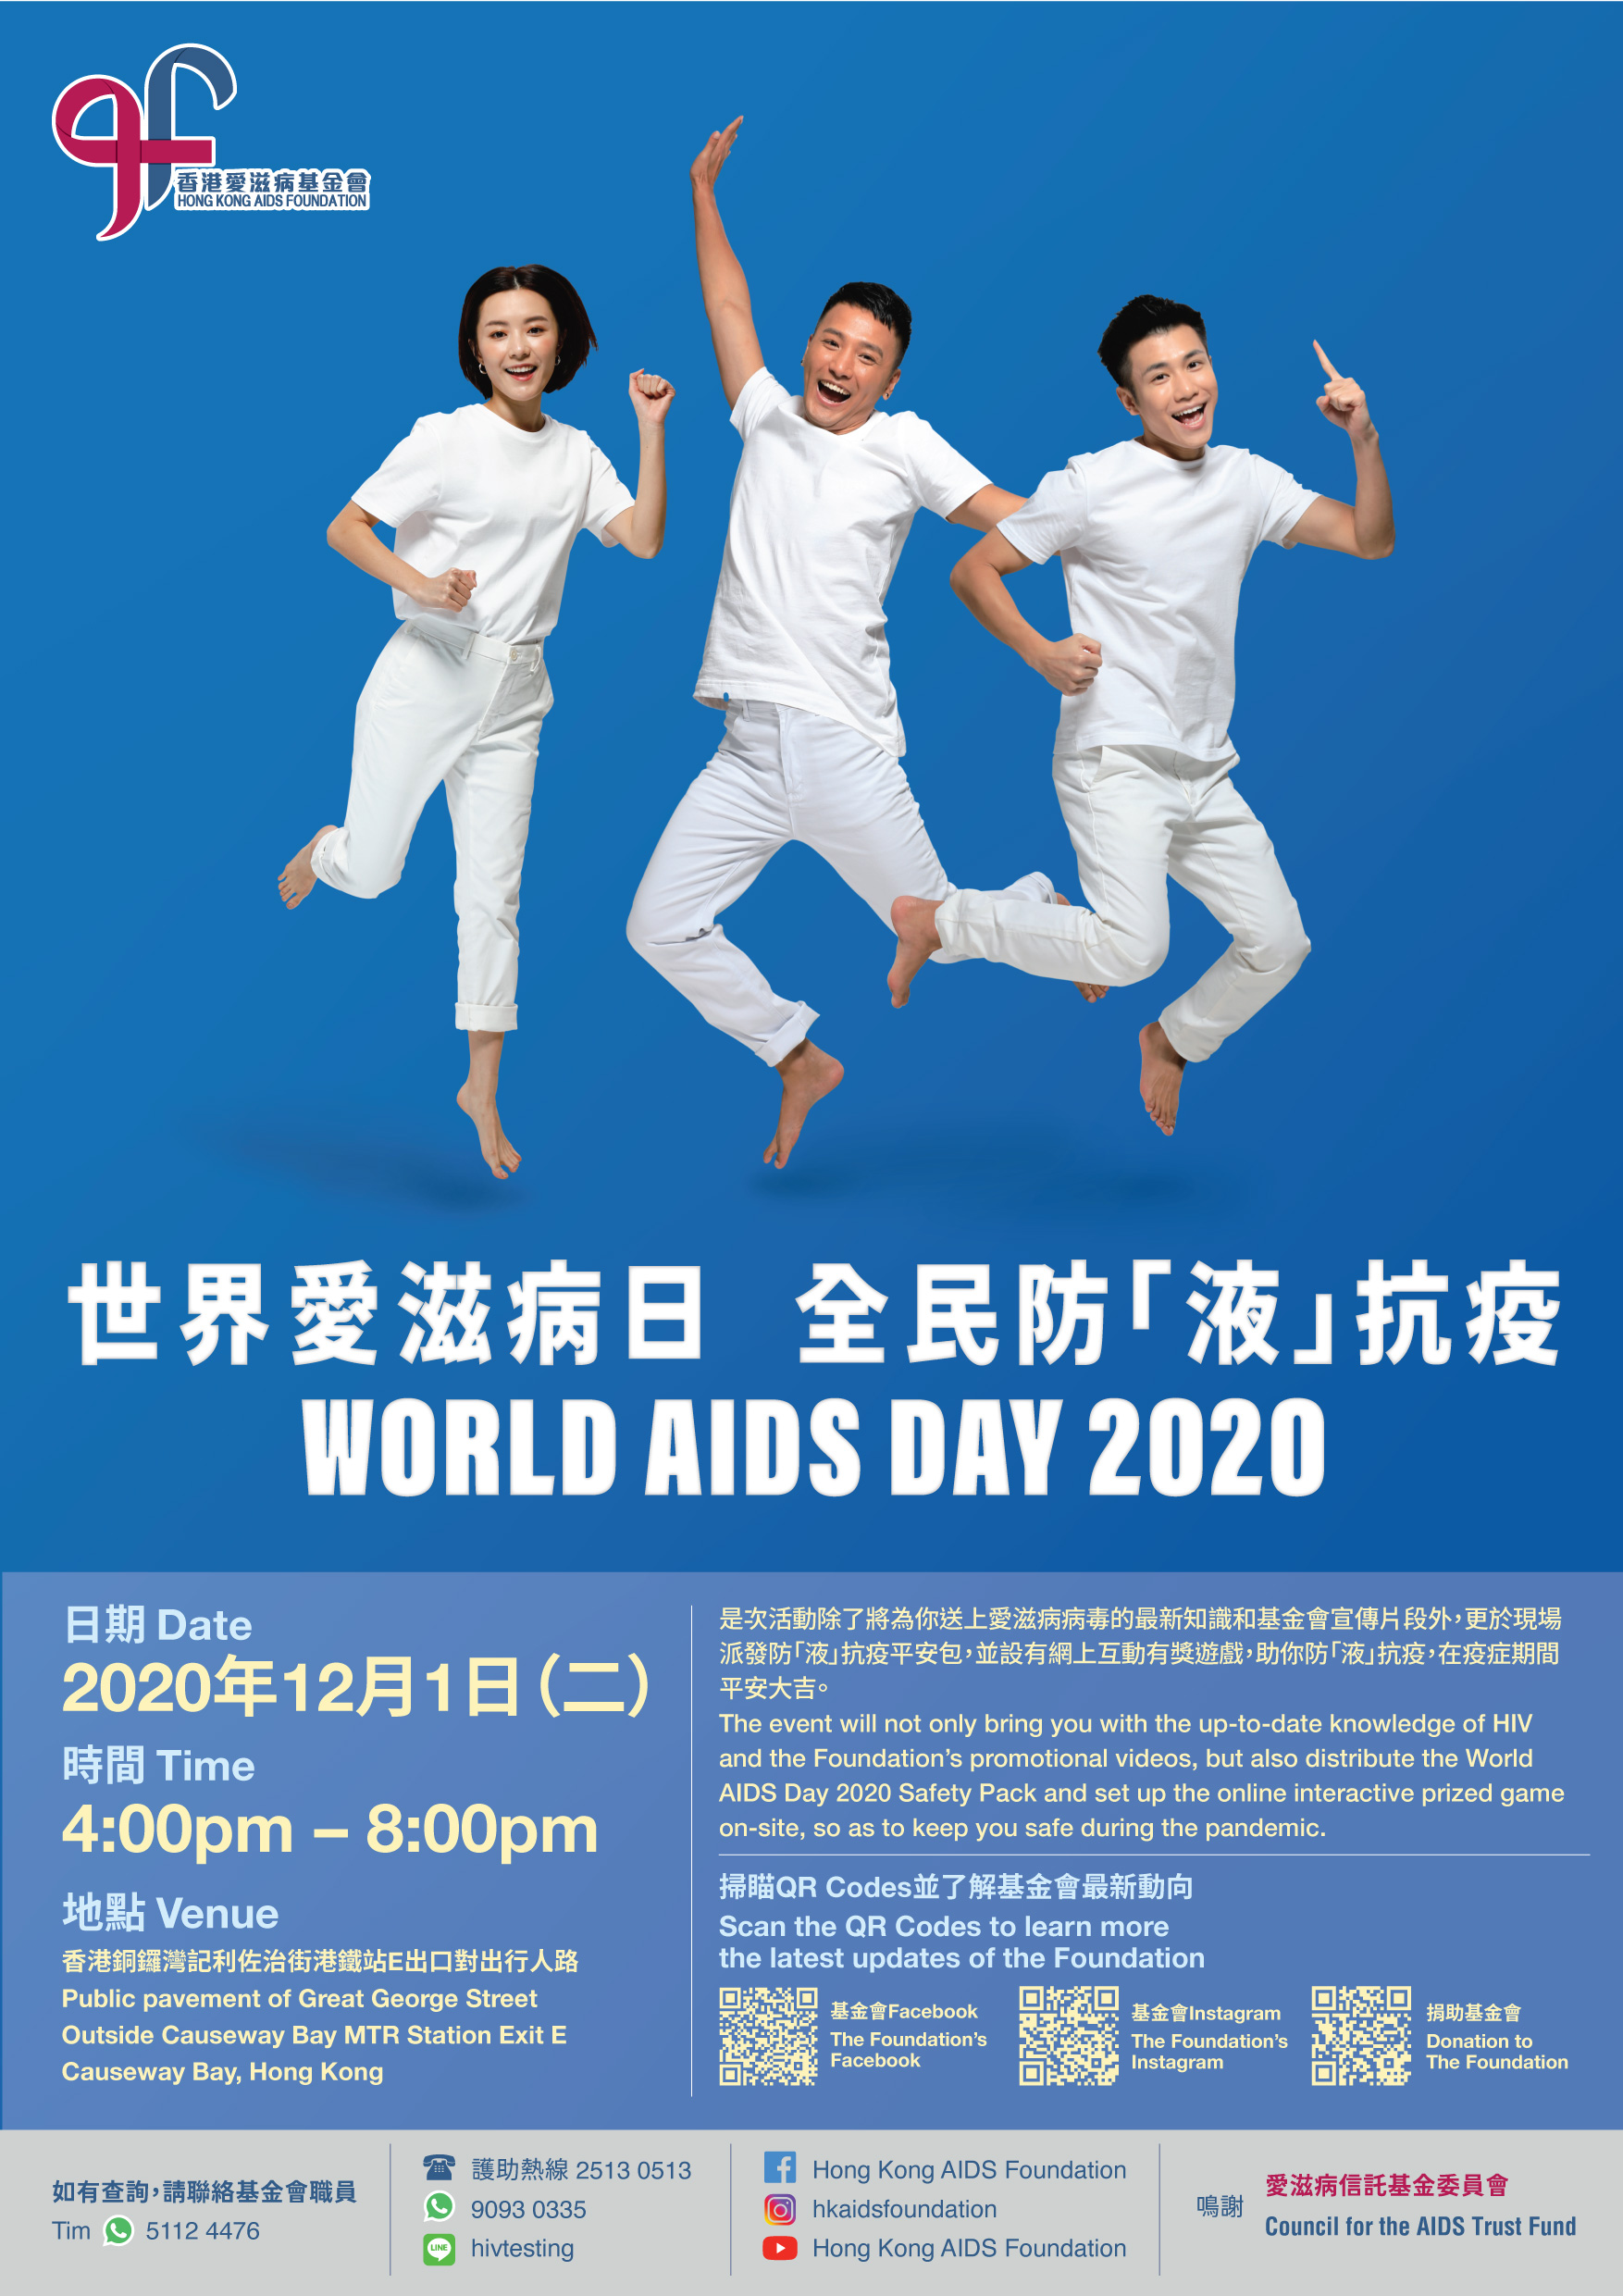 WAD Onsite Promotional Poster_20201124